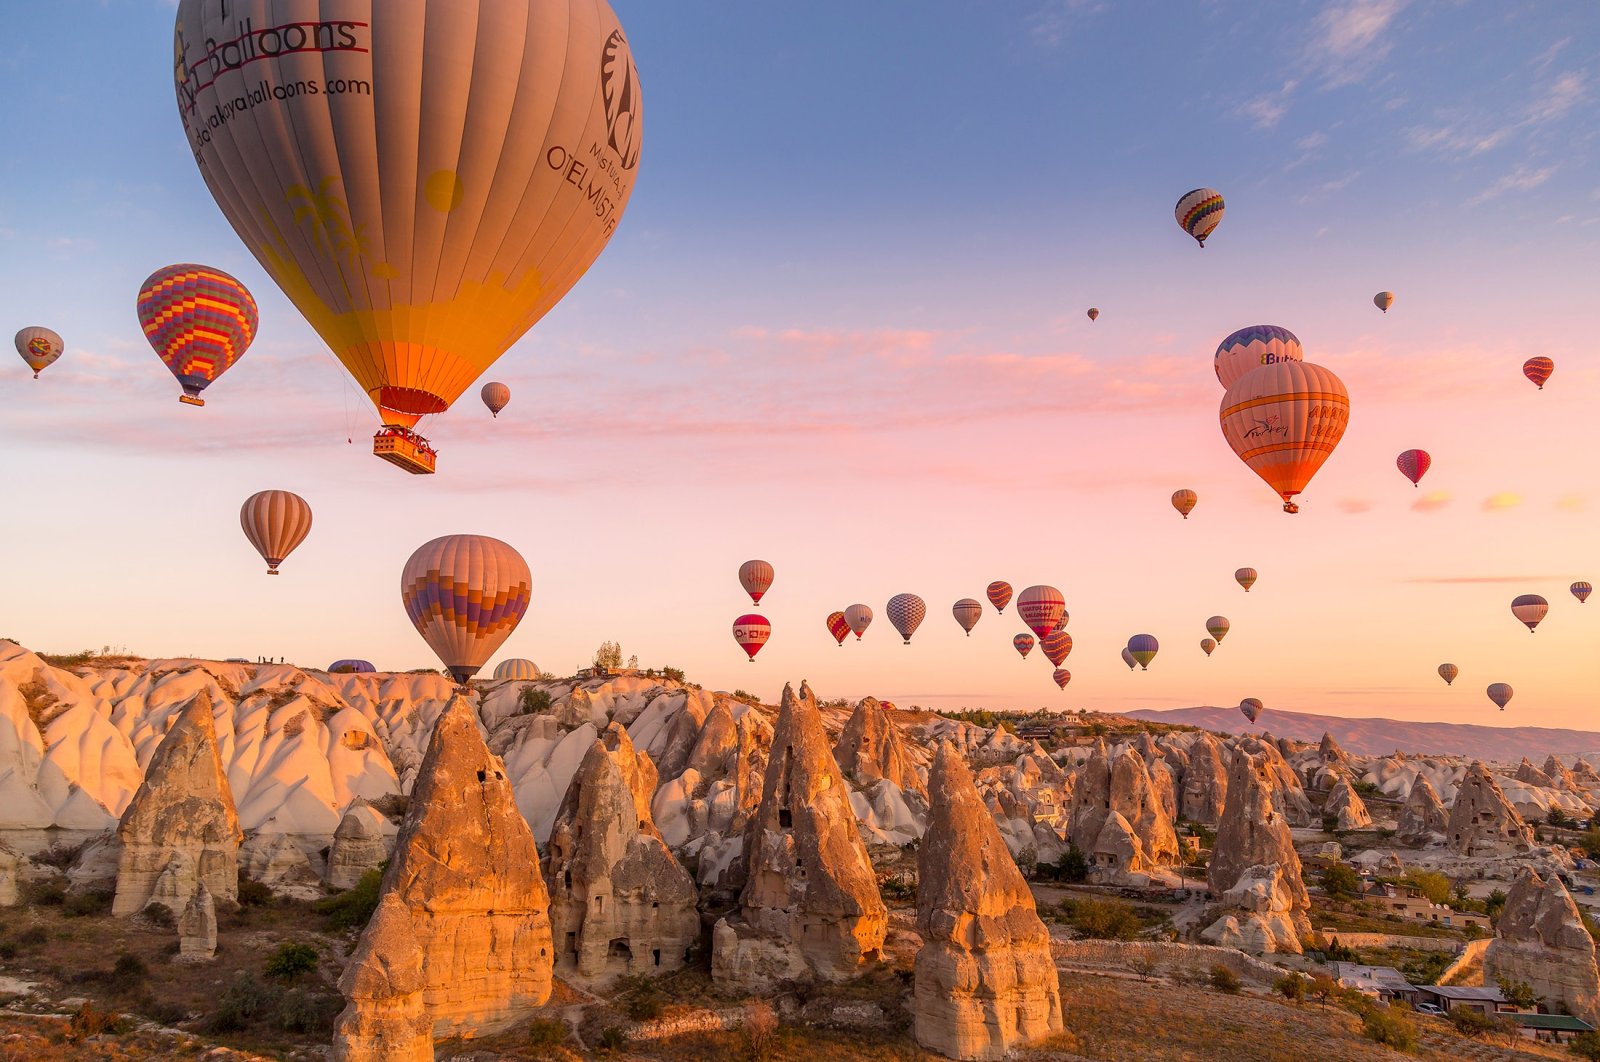 Hot air balloons carrying tourists during a pink sunrise floating along the valleys of Göreme National Park, Turkey, Oct. 7, 2019. (Shutterstock Photo)